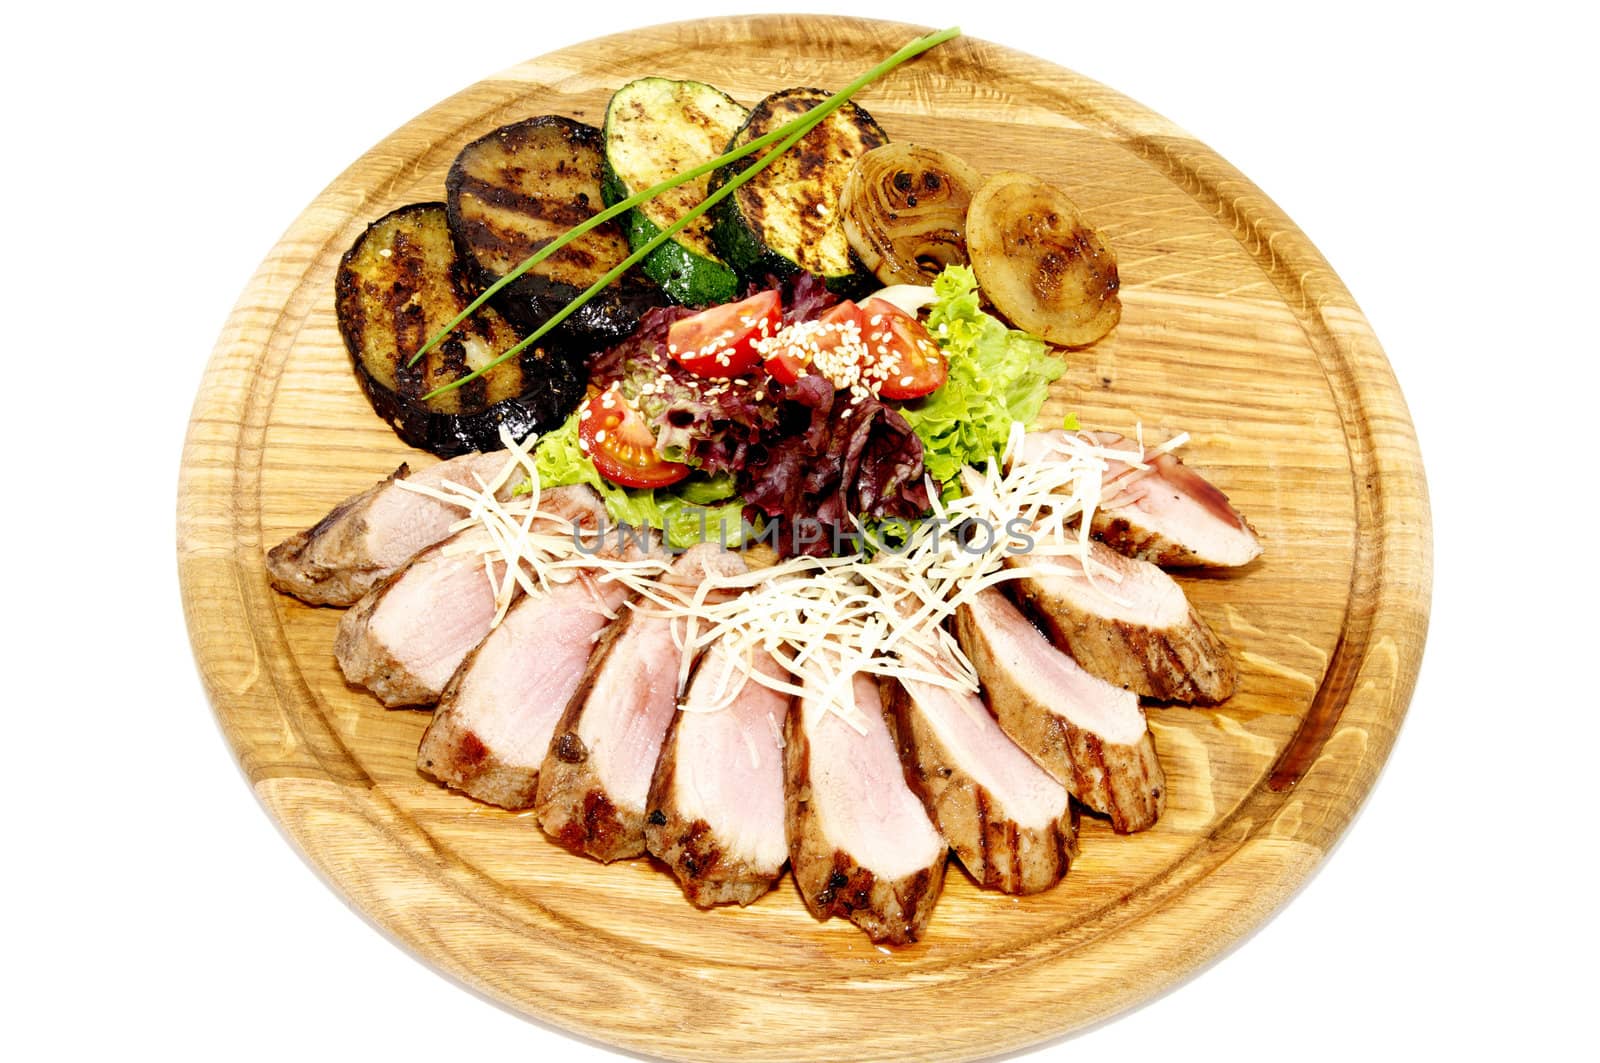 grilled meat with vegetables and herbs on a wooden plate